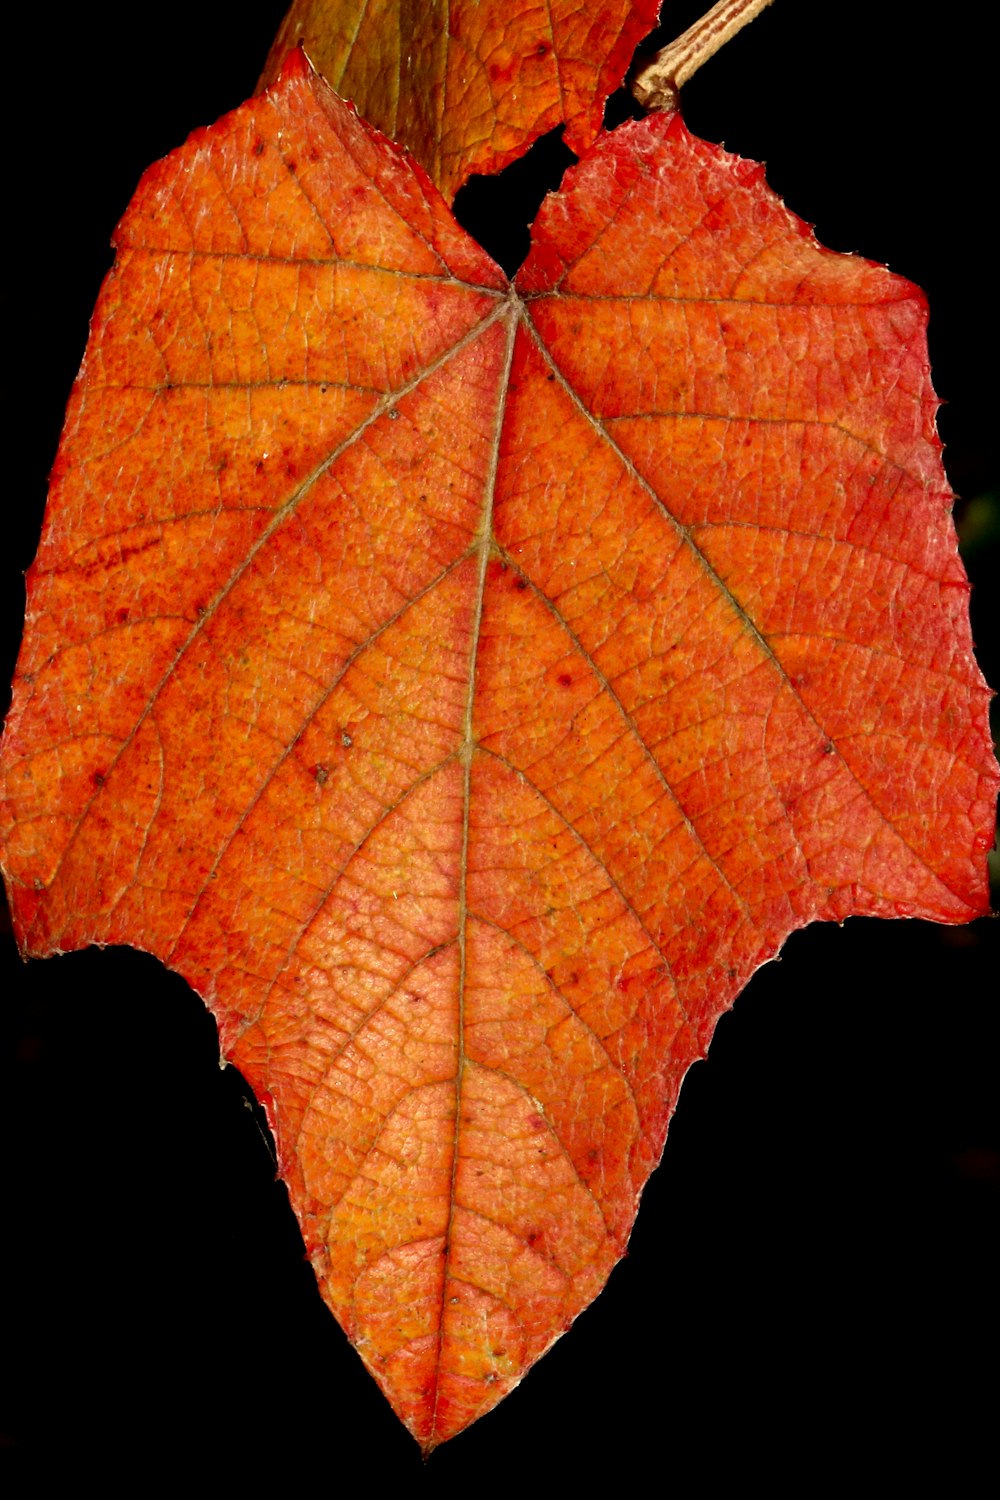 a close up of a leaf on a black background